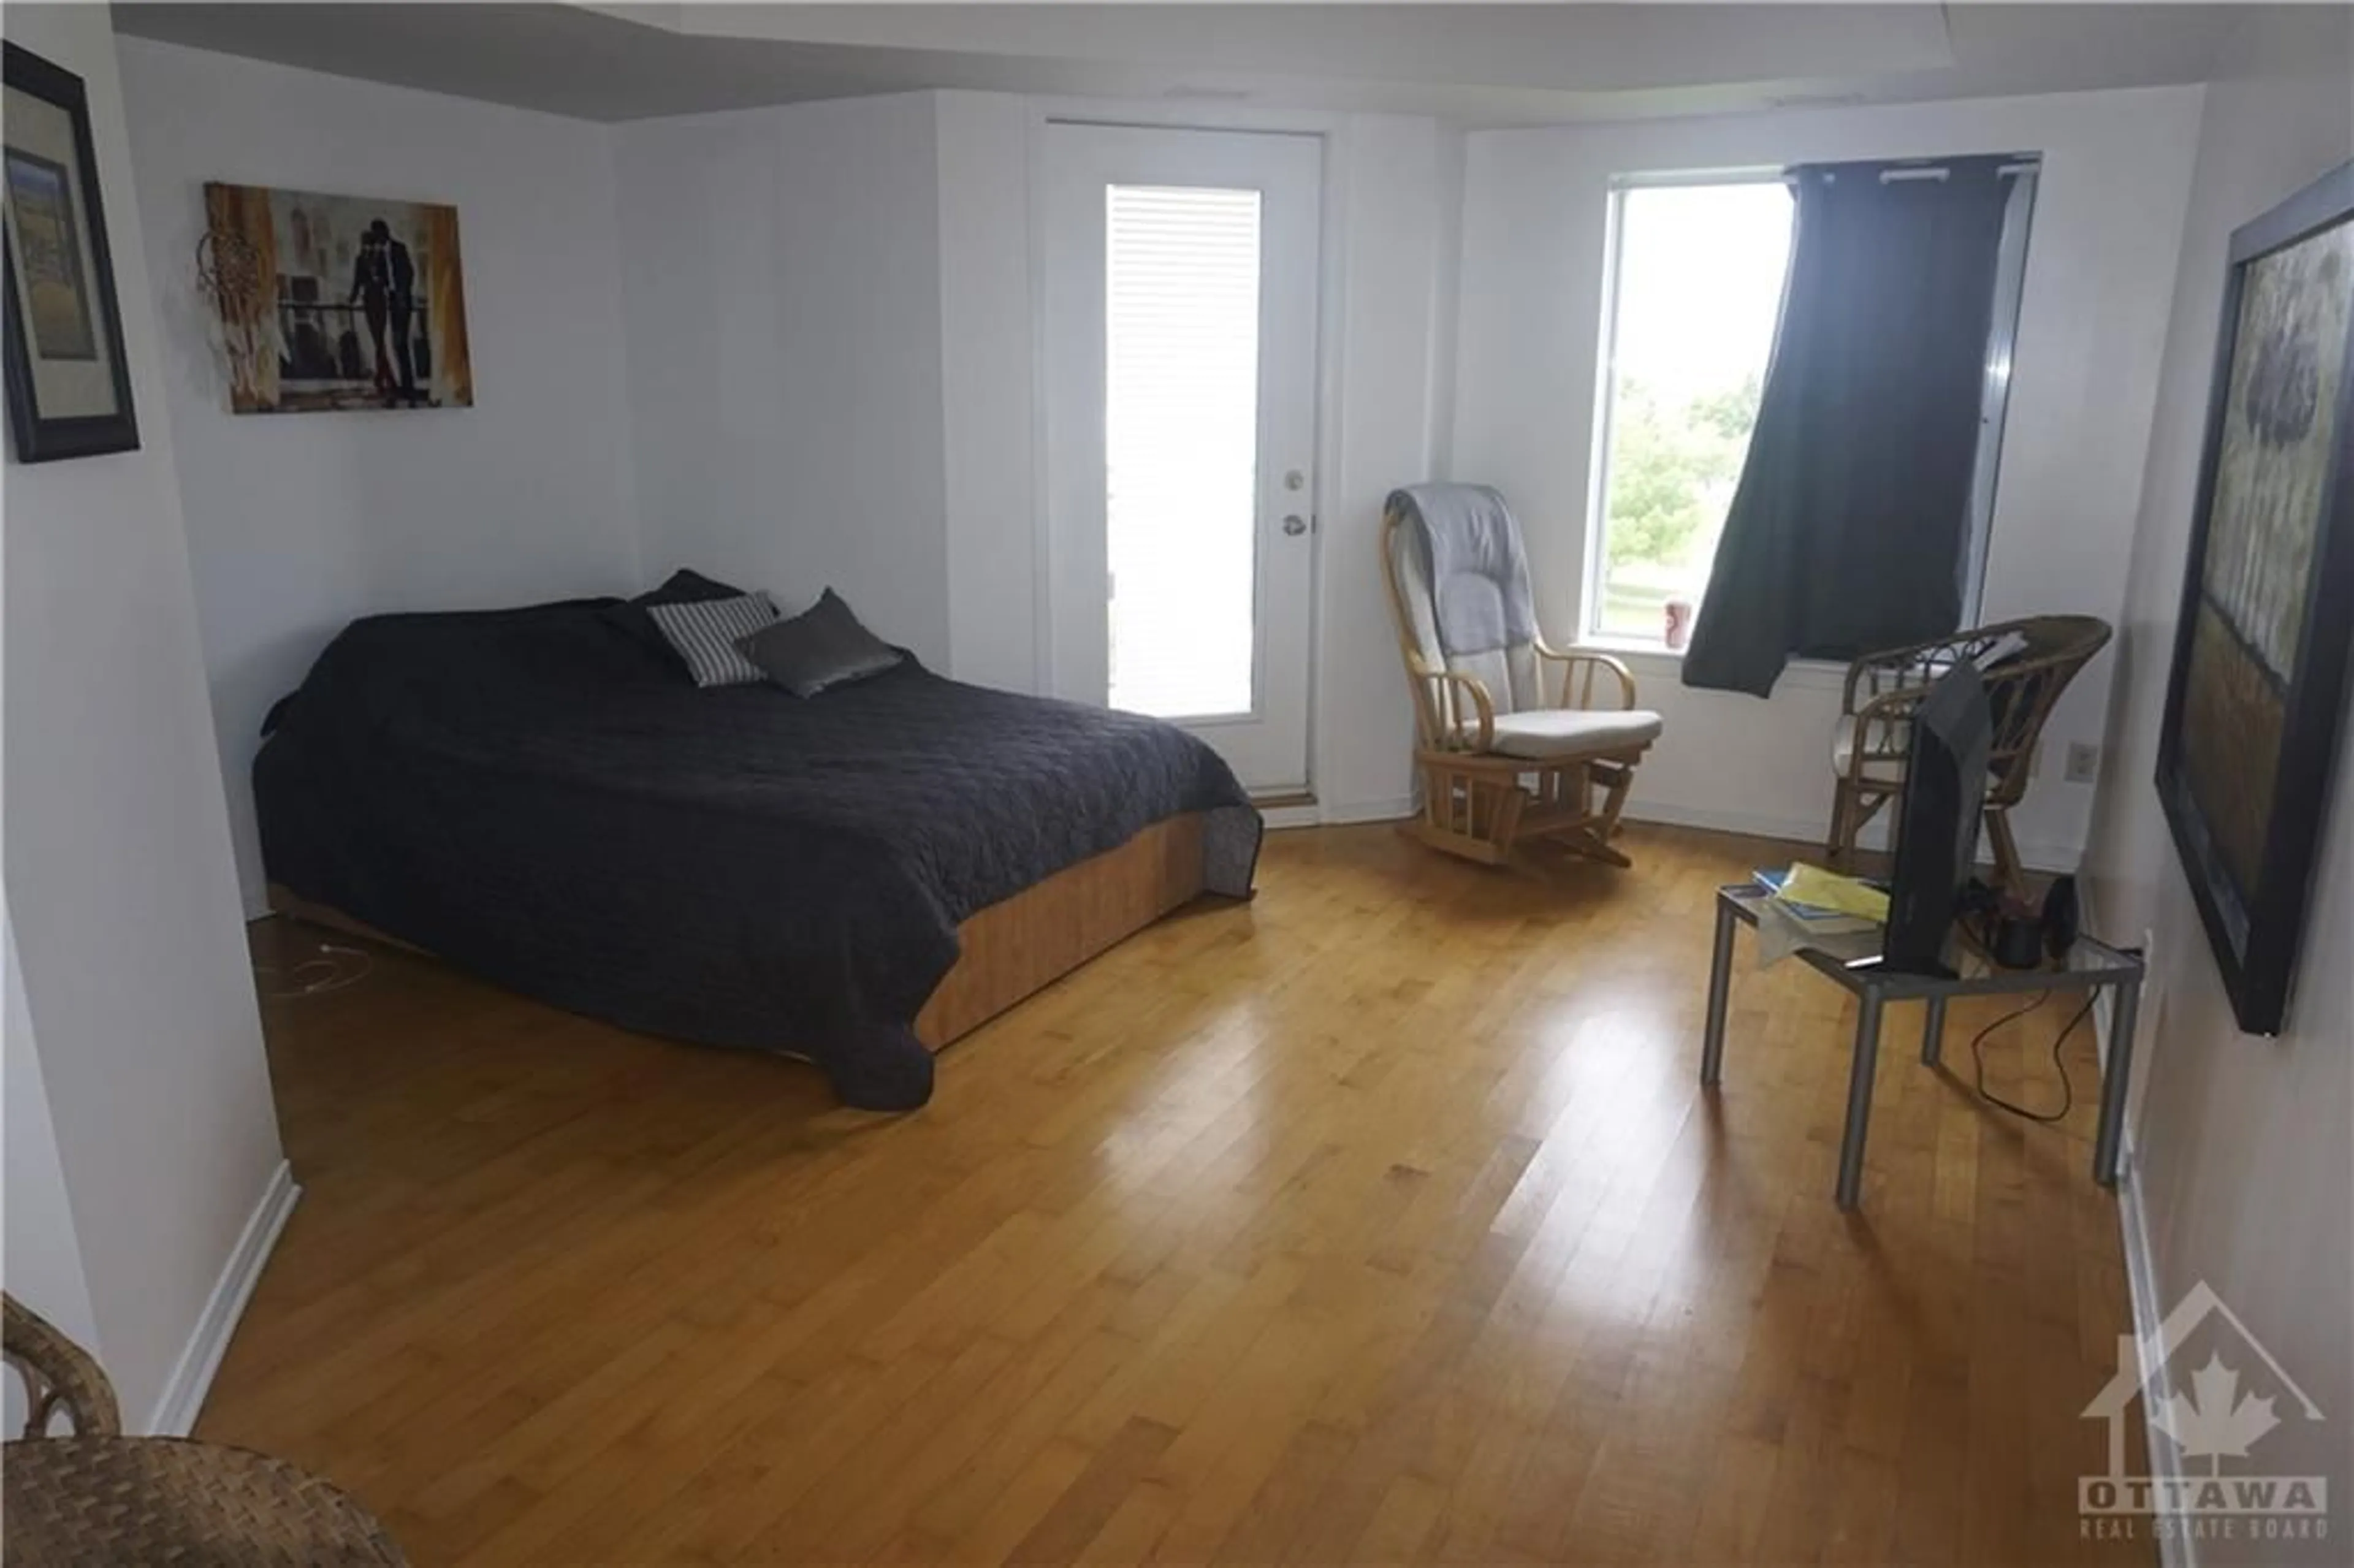 A pic of a room for 310 CENTRAL PARK Dr #4R, Ottawa Ontario K2C 4G4